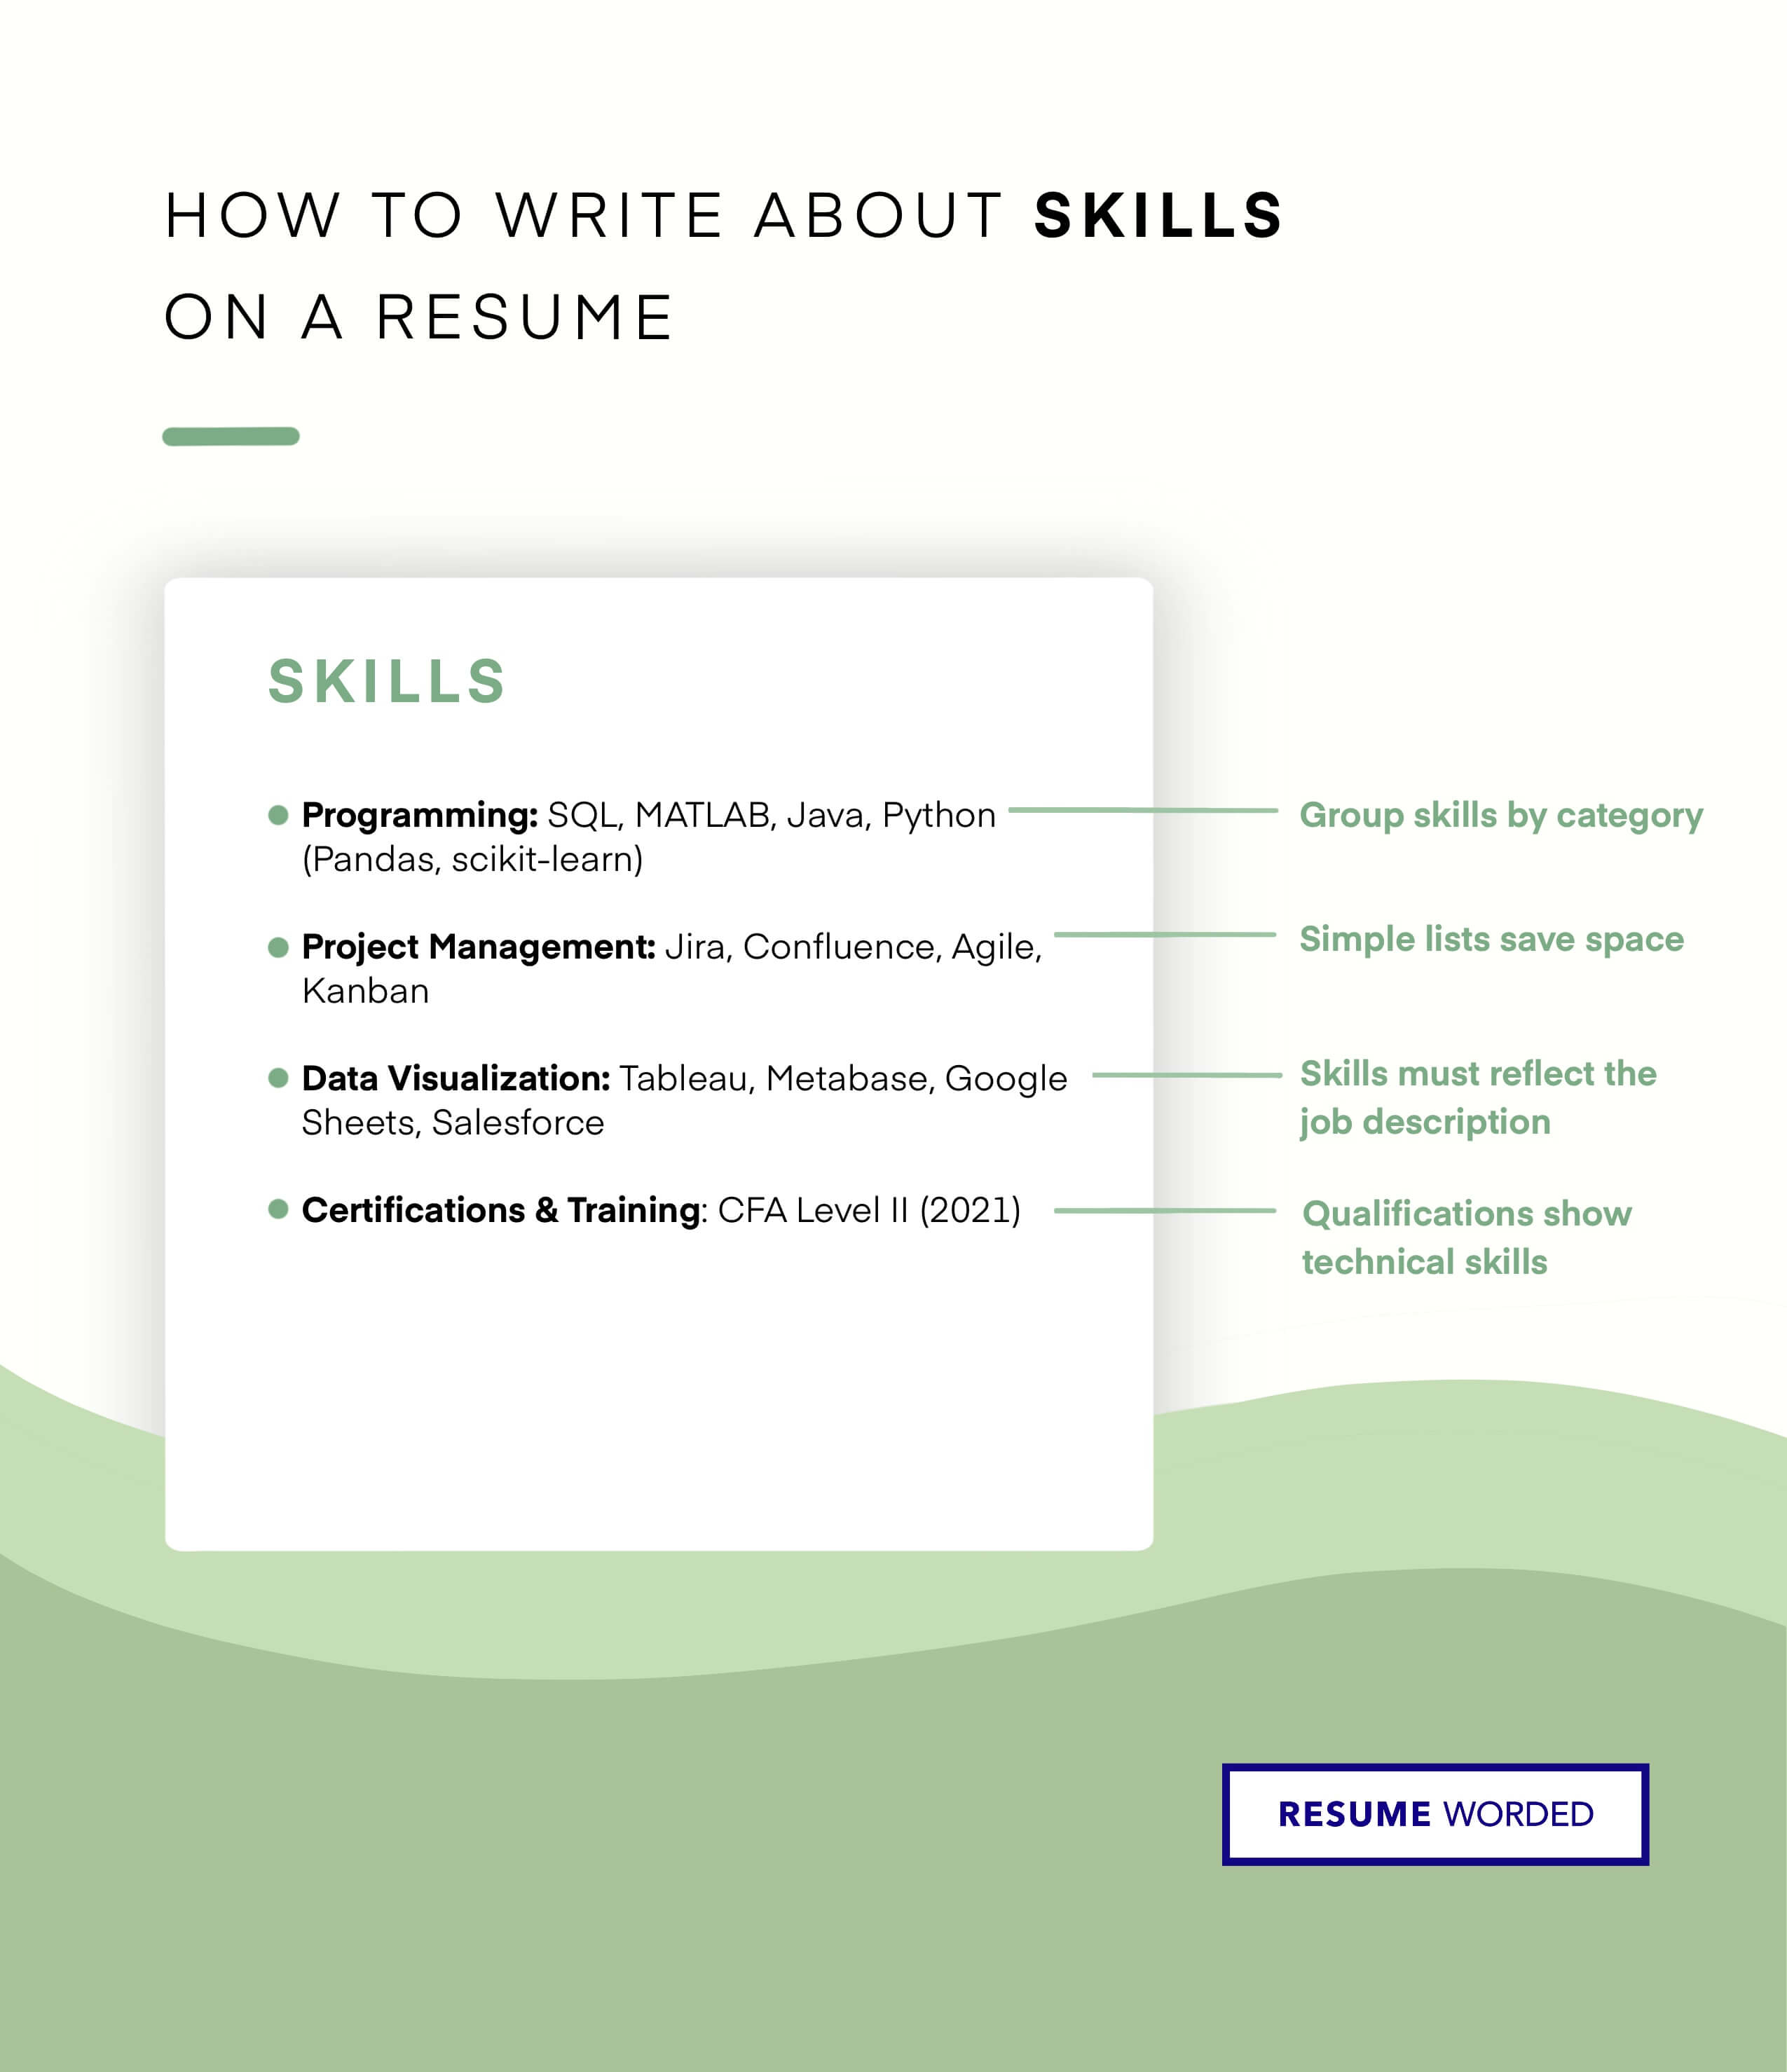 Include a skills section with hard skills